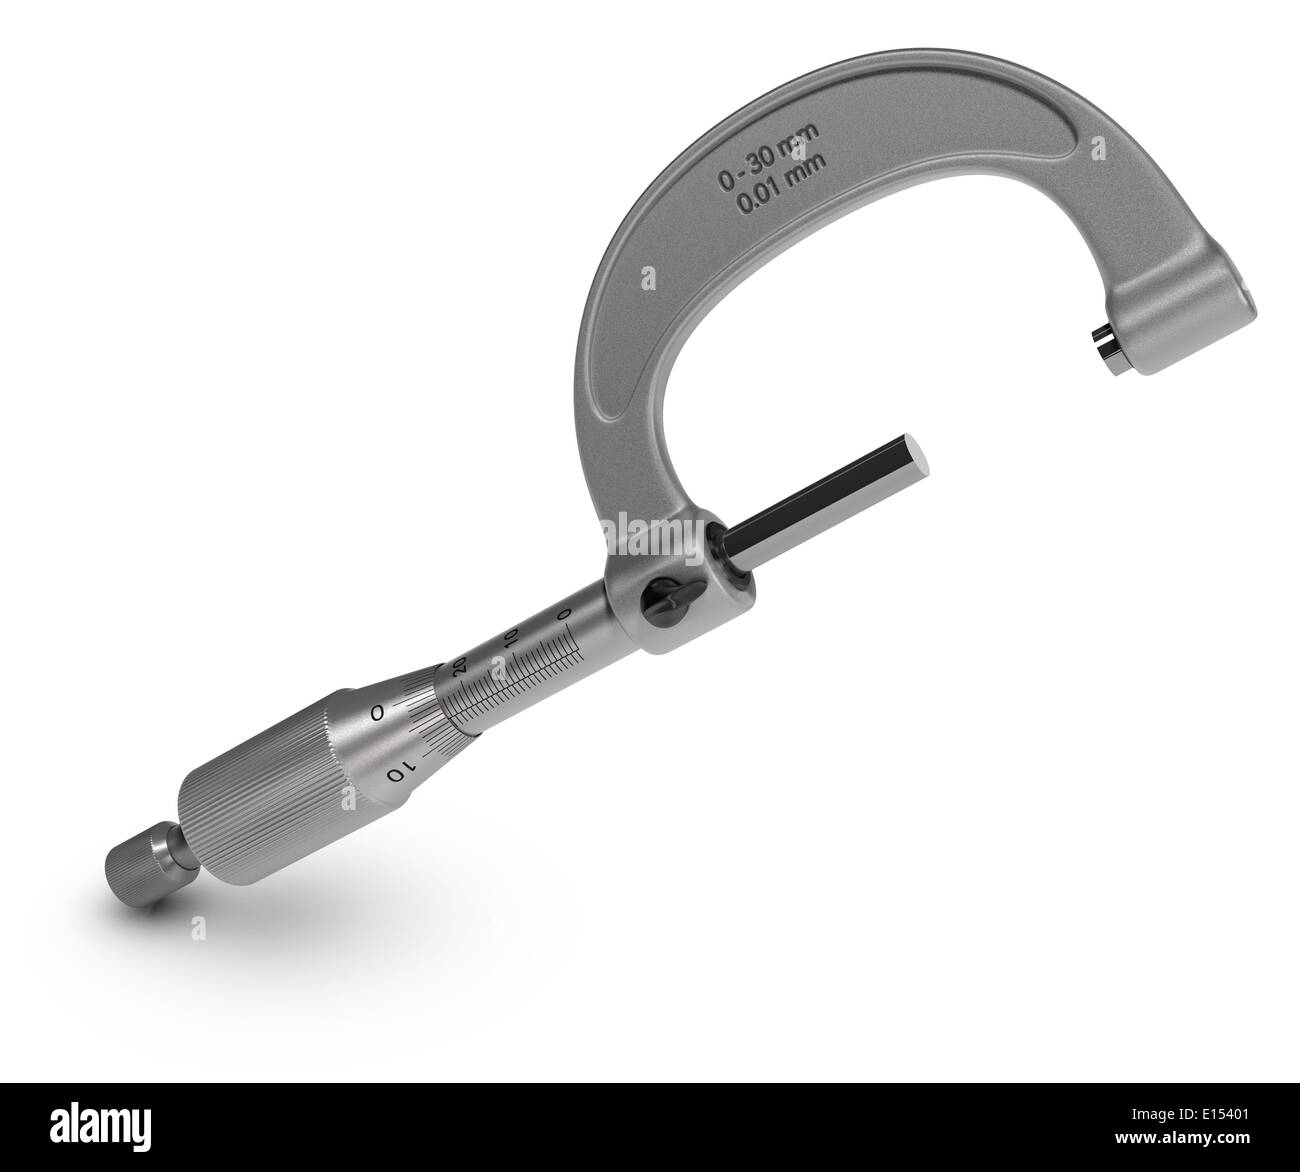 Entire micrometer over white background - Dimensional measure tool. 3D render image . Stock Photo